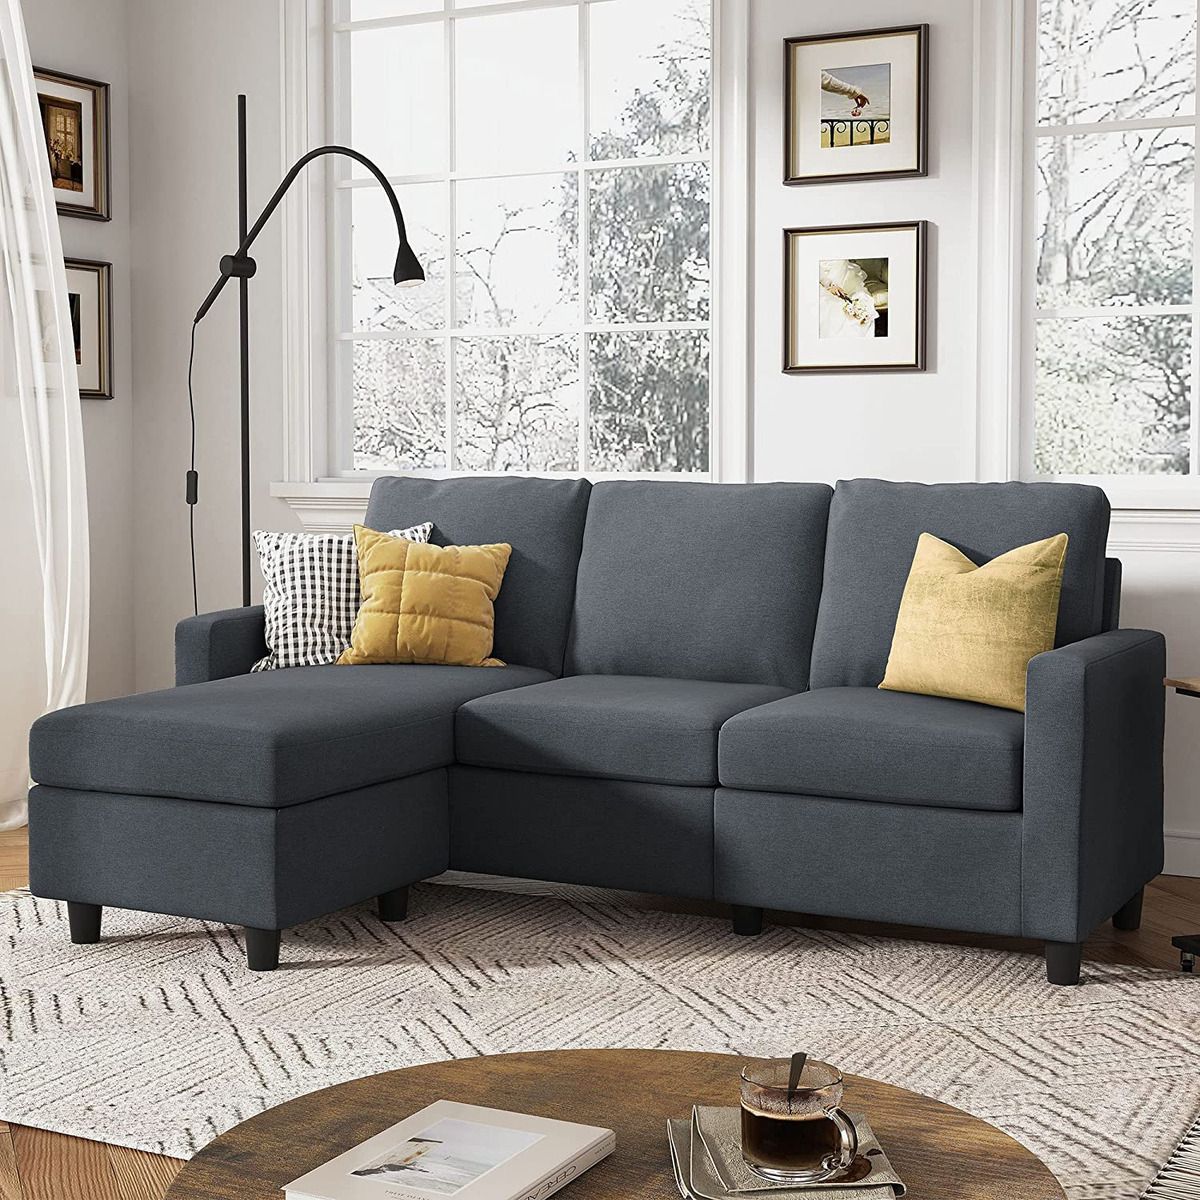 Honbay Convertible Sectional Sofa, L Shaped Couch With Reversible Chaise  For Sma | Ebay Regarding Convertible L Shaped Sectional Sofas (View 6 of 24)